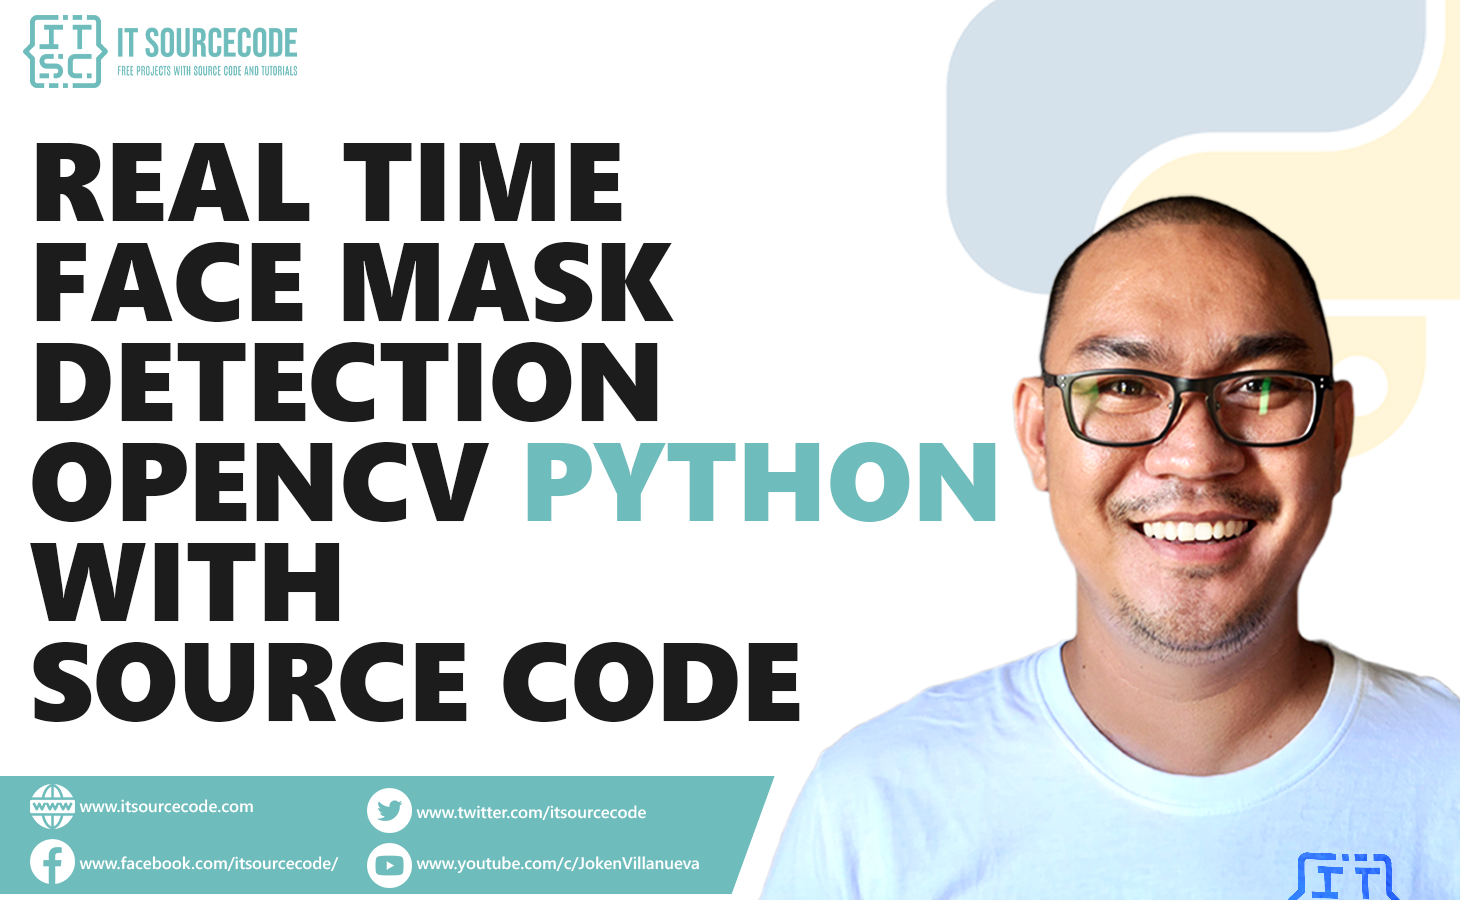 Real-Time Face Mask Detection OpenCV Python With Source Code